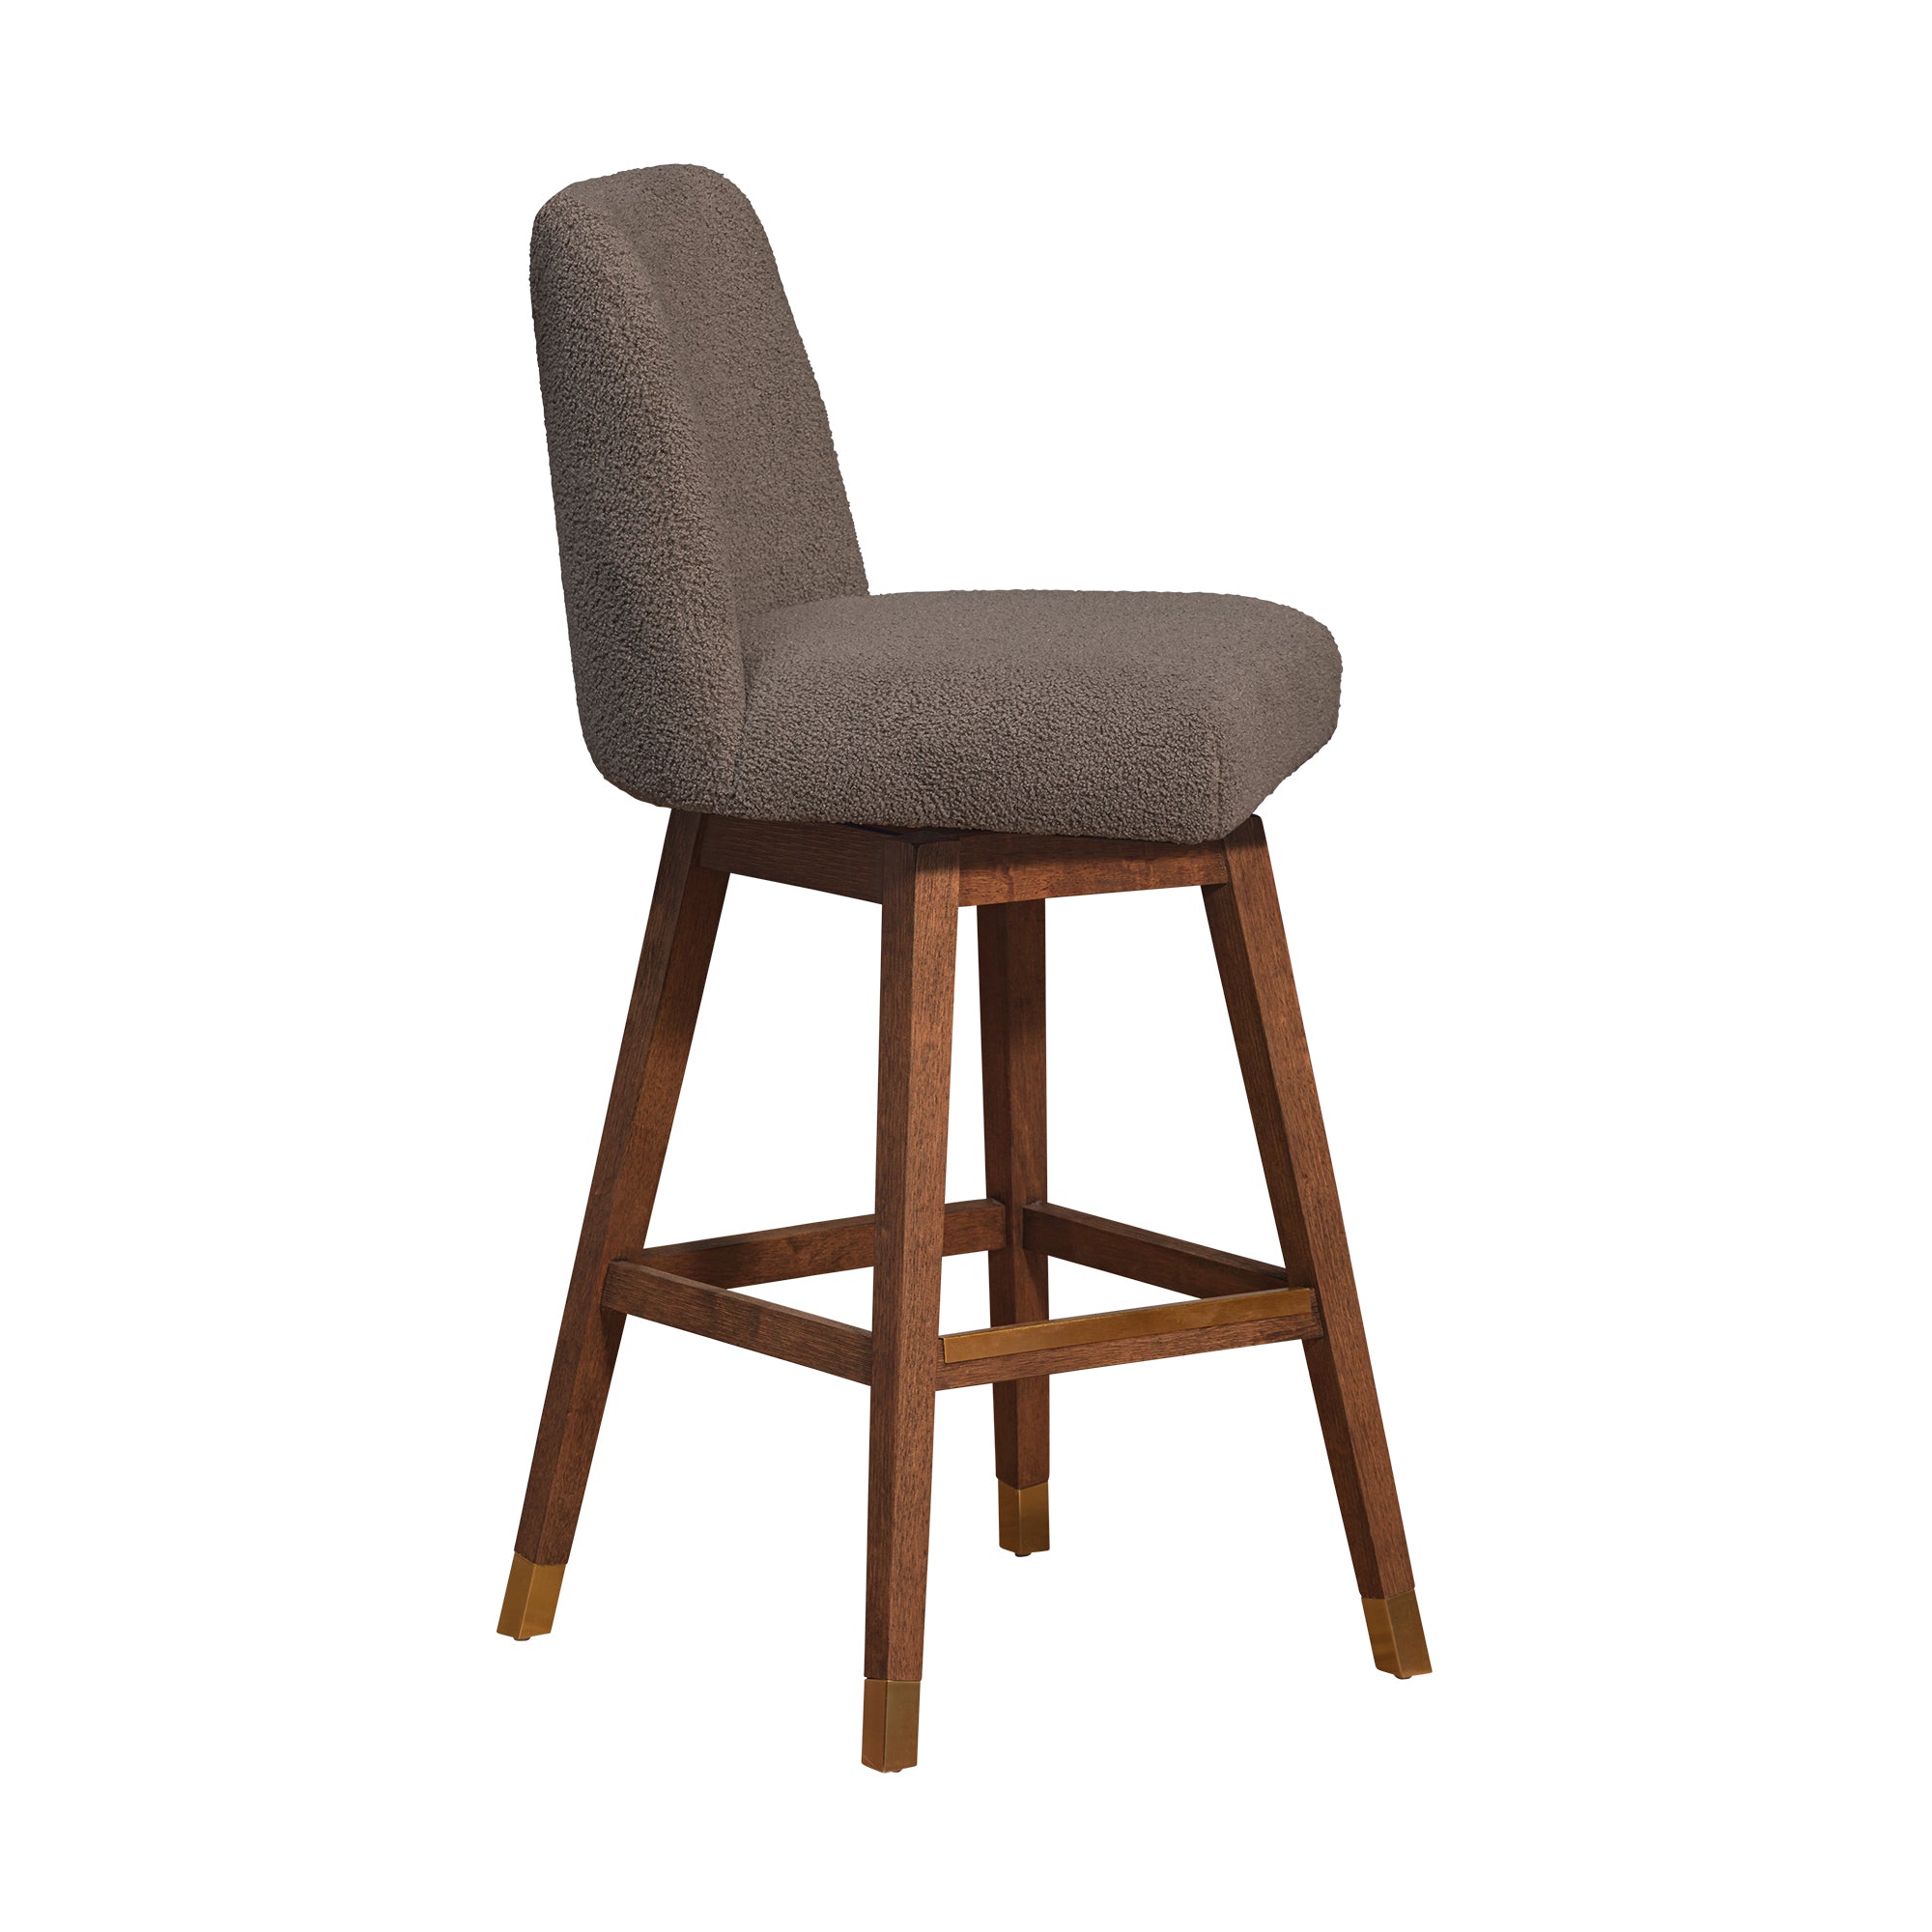 Armen Living - Amalie Swivel Bar or Counter Stool in Brown Oak Wood Finish with Taupe Boucle Fabric - 840254332041